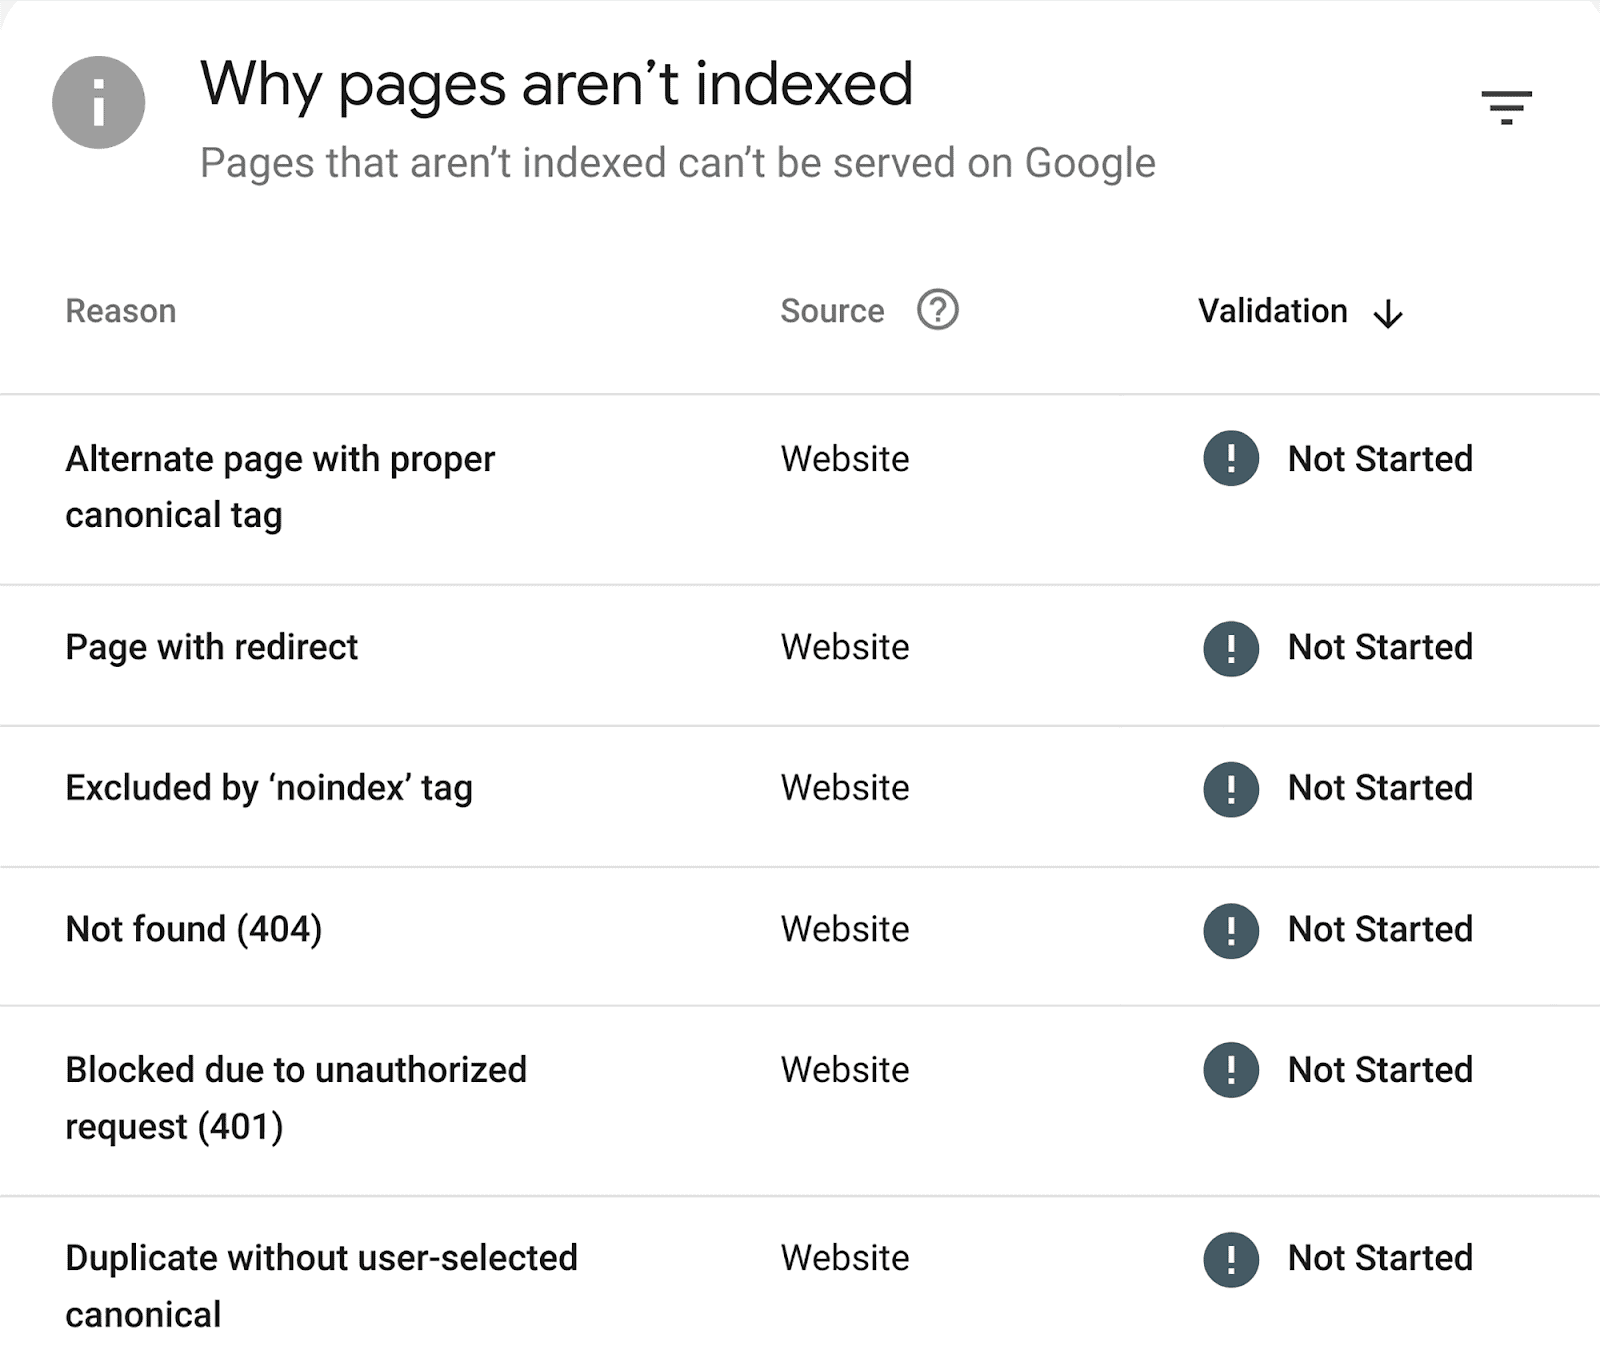 Why pages are not indexed